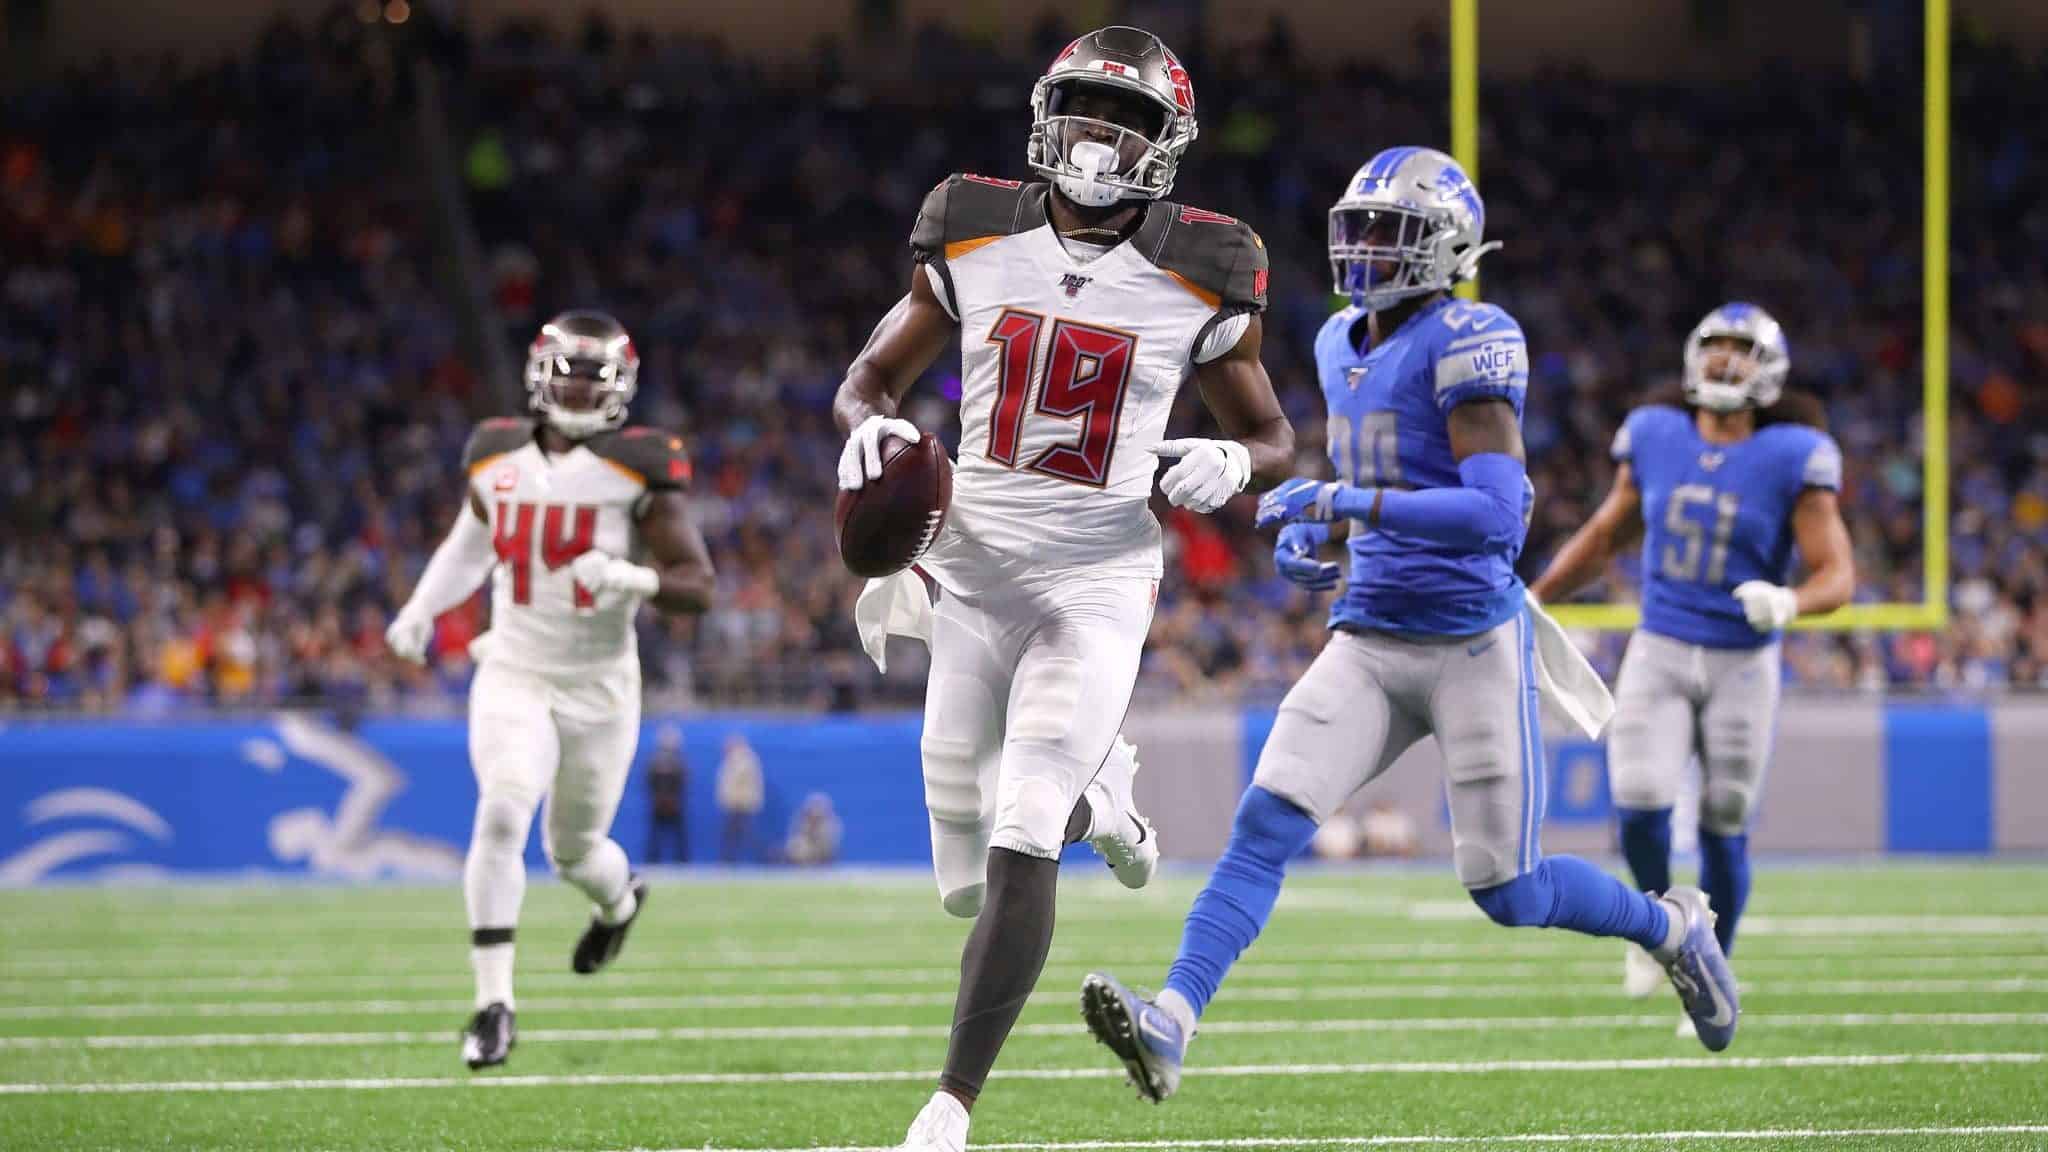 DETROIT, MICHIGAN - DECEMBER 15: Breshad Perriman #19 of the Tampa Bay Buccaneers scores a second quarter touchdown past Amani Oruwariye #24 of the Detroit Lions at Ford Field on December 15, 2019 in Detroit, Michigan.